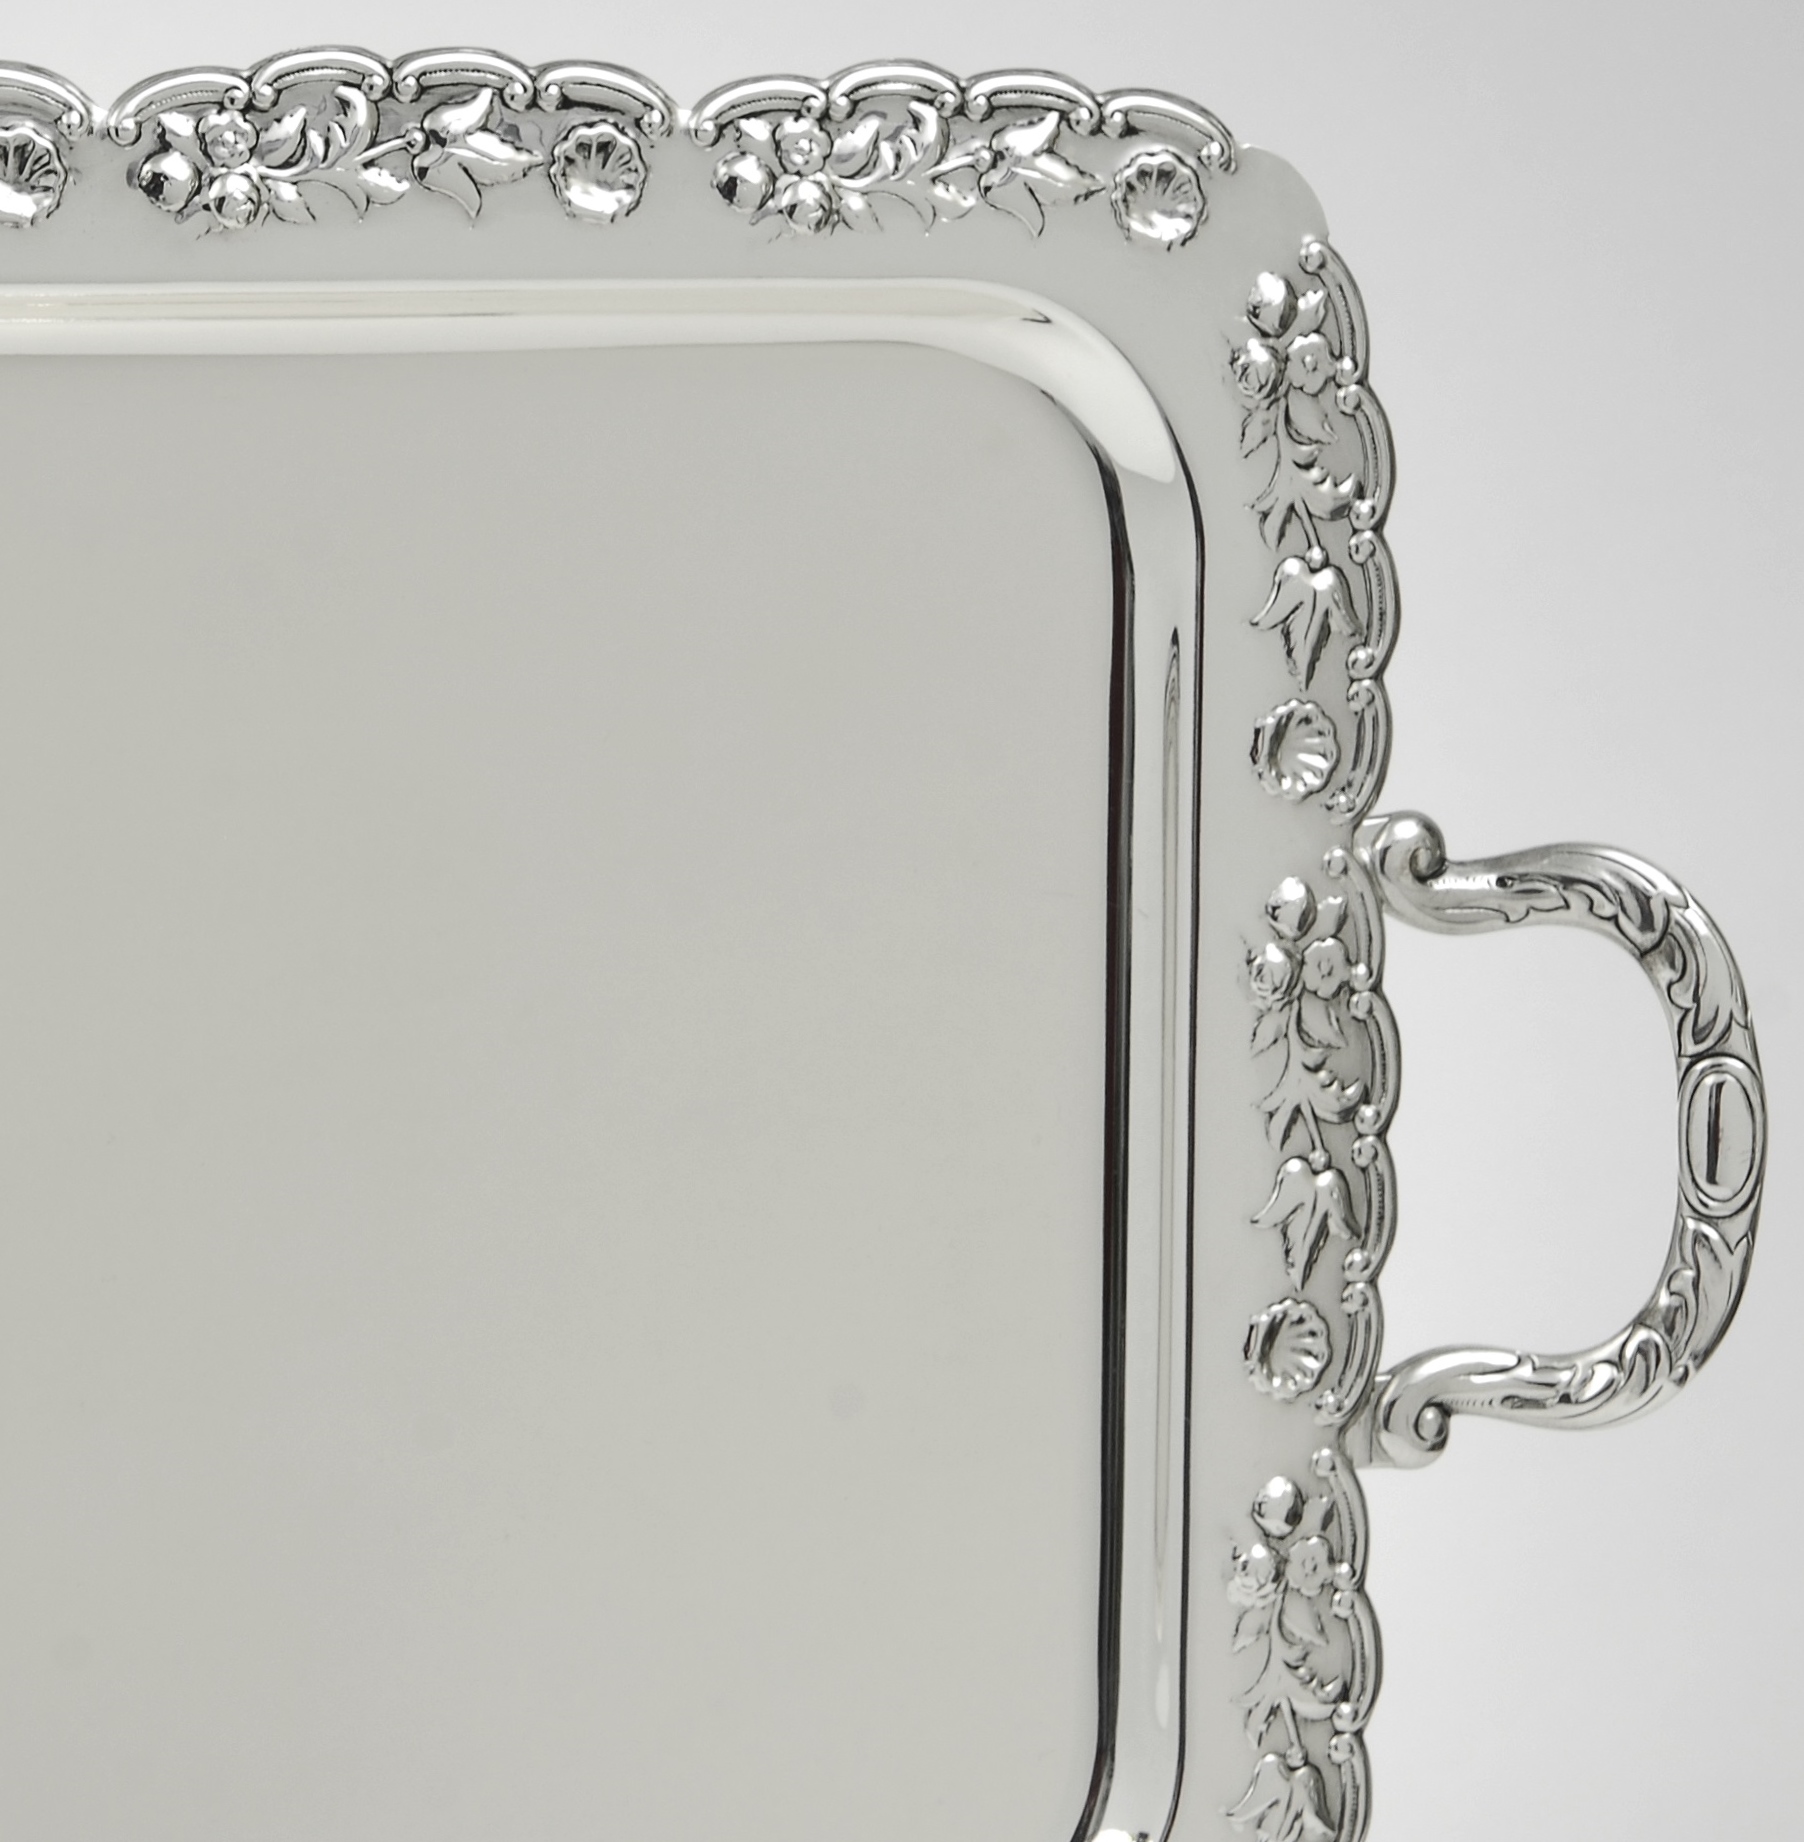 SILVER PLATED TRAY , RECTANGULAR, DIMENSIONS 43X33CM WITH FLORAL DECOR